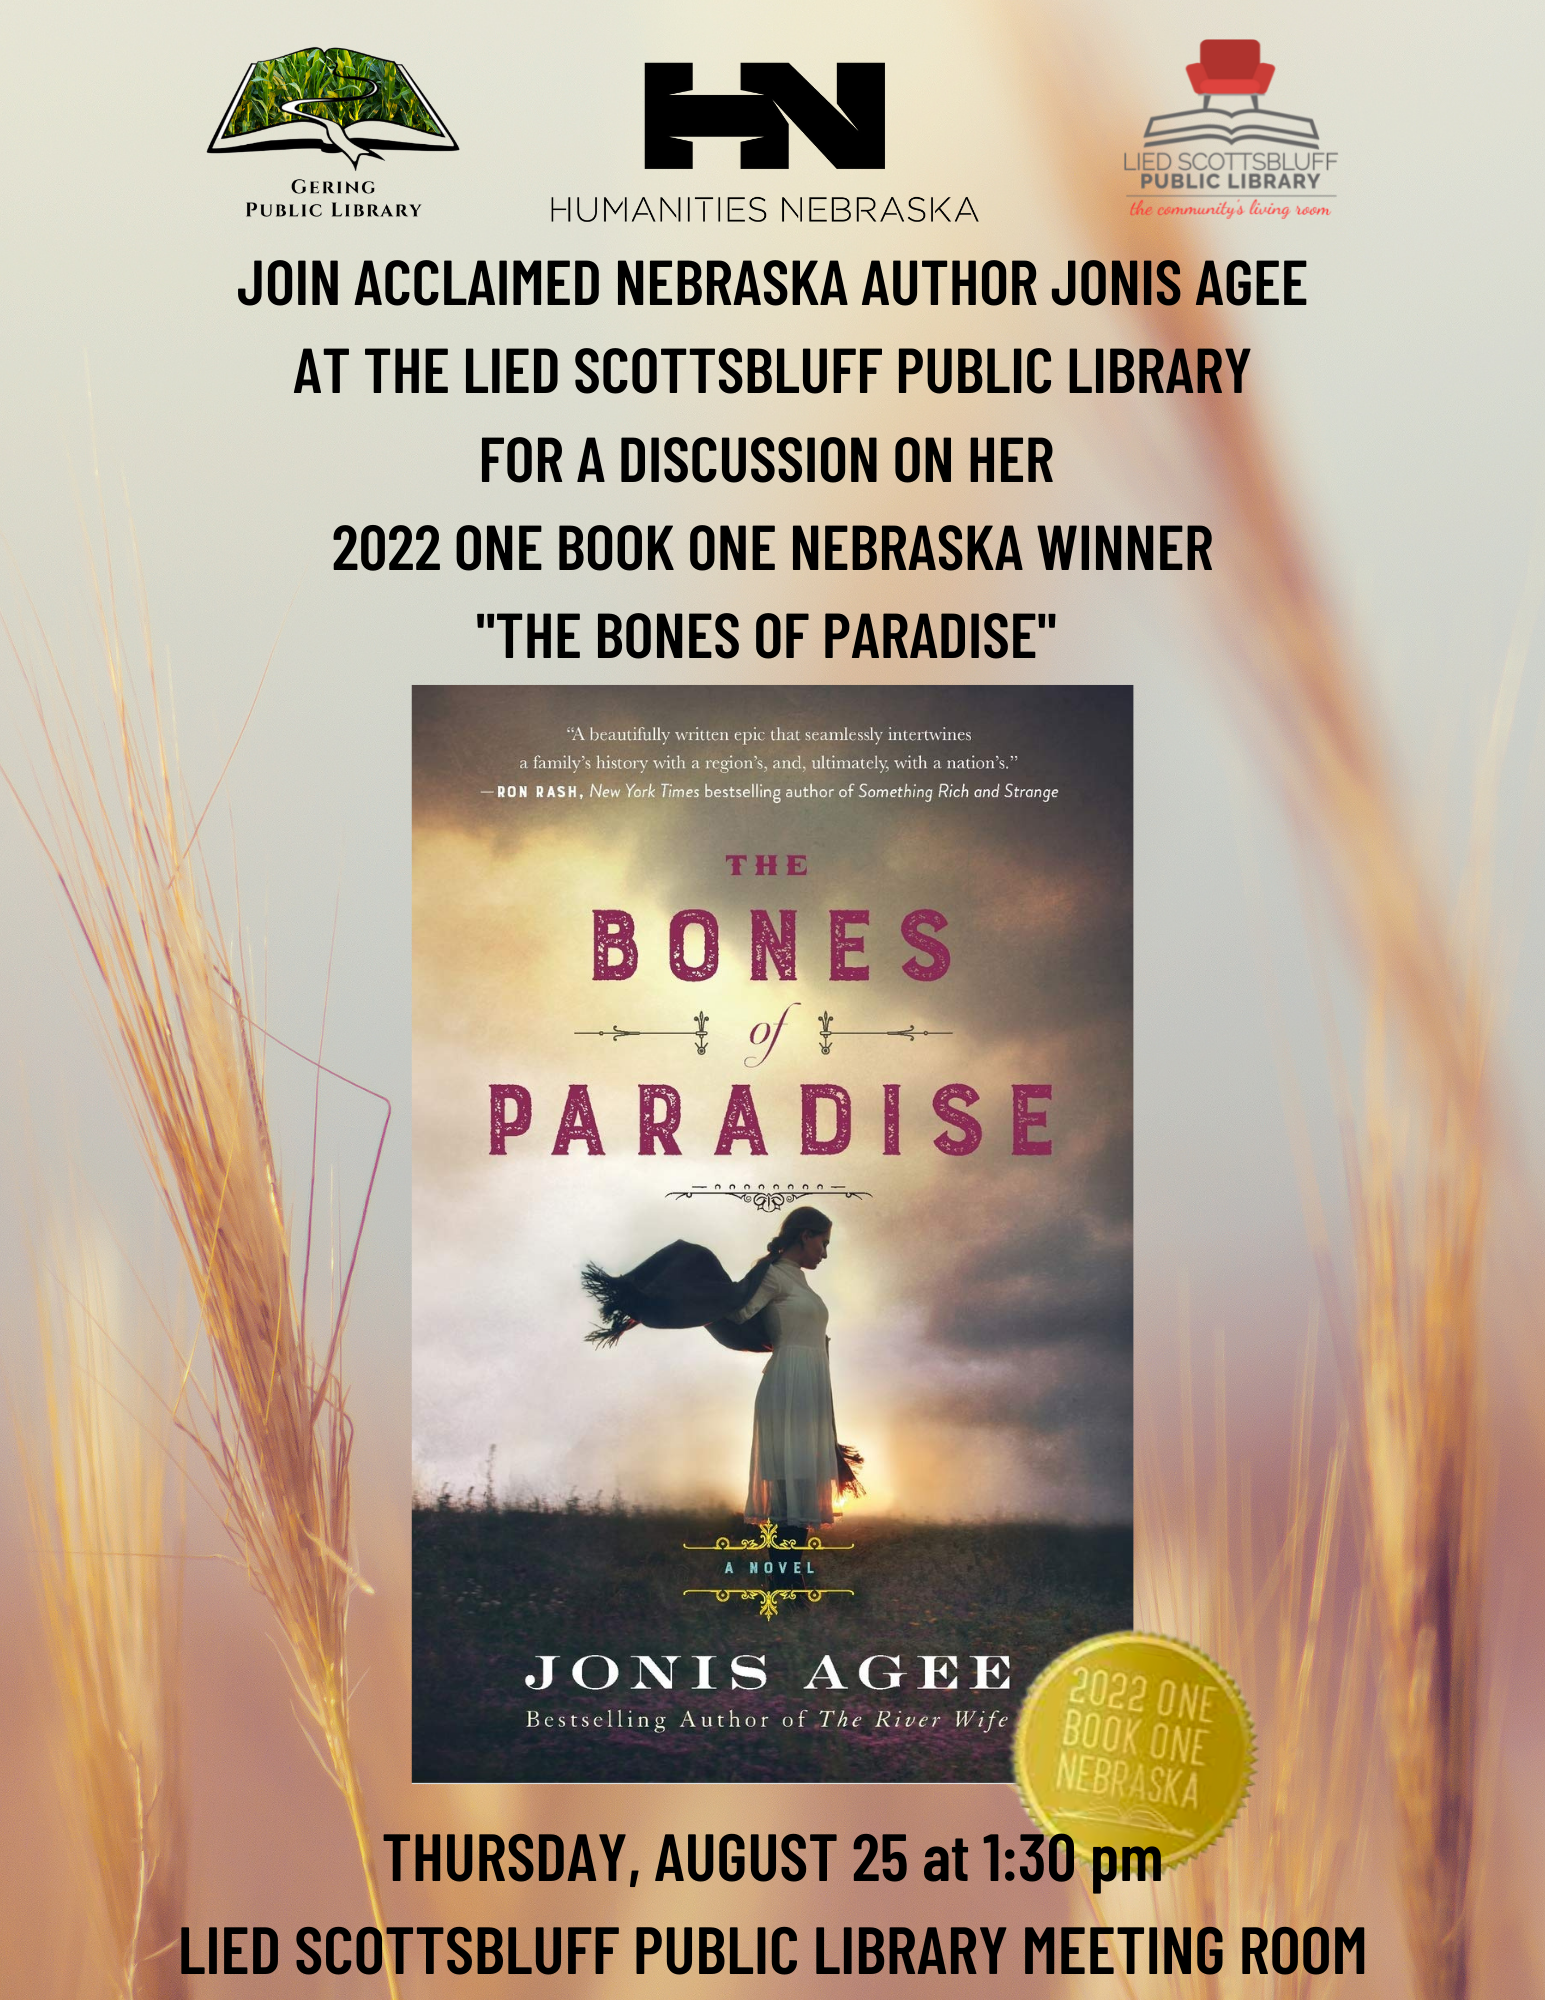 A flyer about the upcoming visit by author Jonis Agee at the Scottsbluff Library at 1:30 August 25.